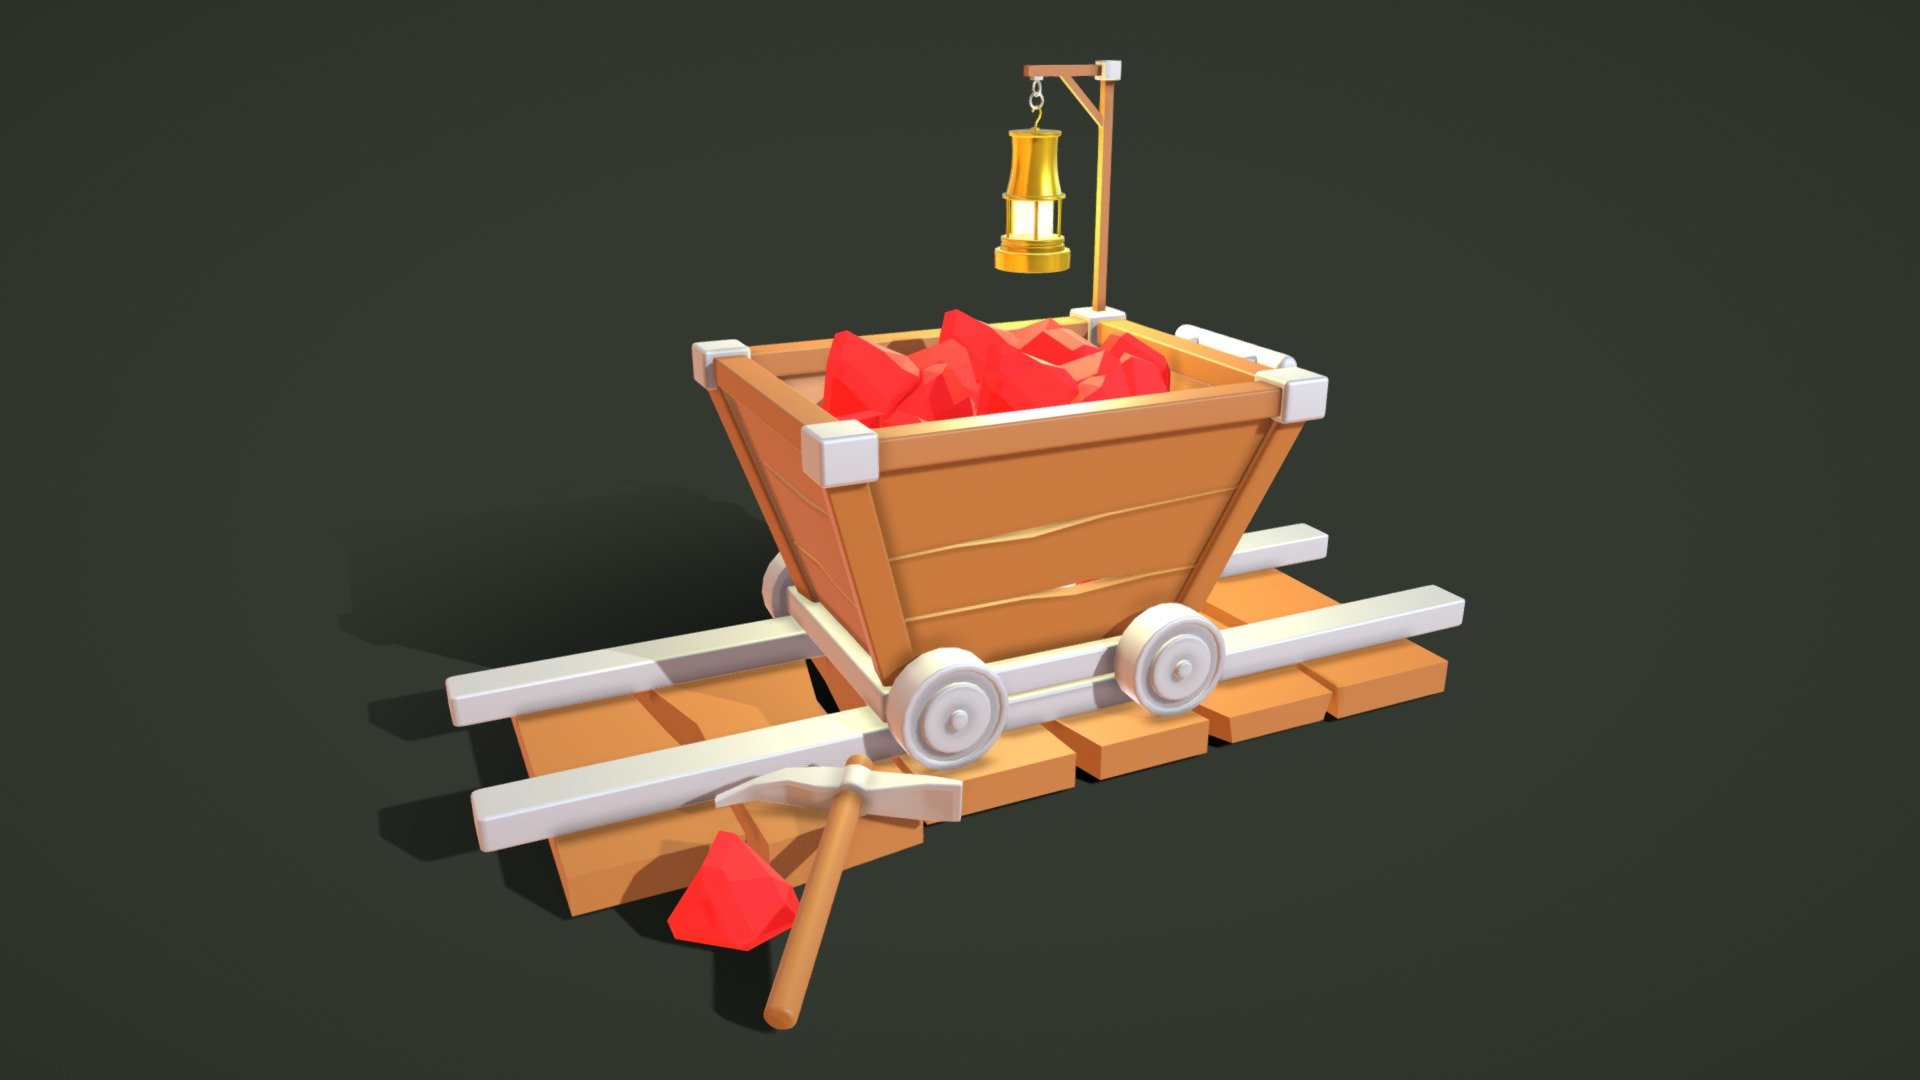 Minimalist stylized trolley made with the first theme of inktober. 

Contains : Trolley, tracks, lantern, pickaxe and crystals.

Can be use for video games engines (Unity or Unreal Engine). 

Made with Maya. No textures, only flat materials 3d model